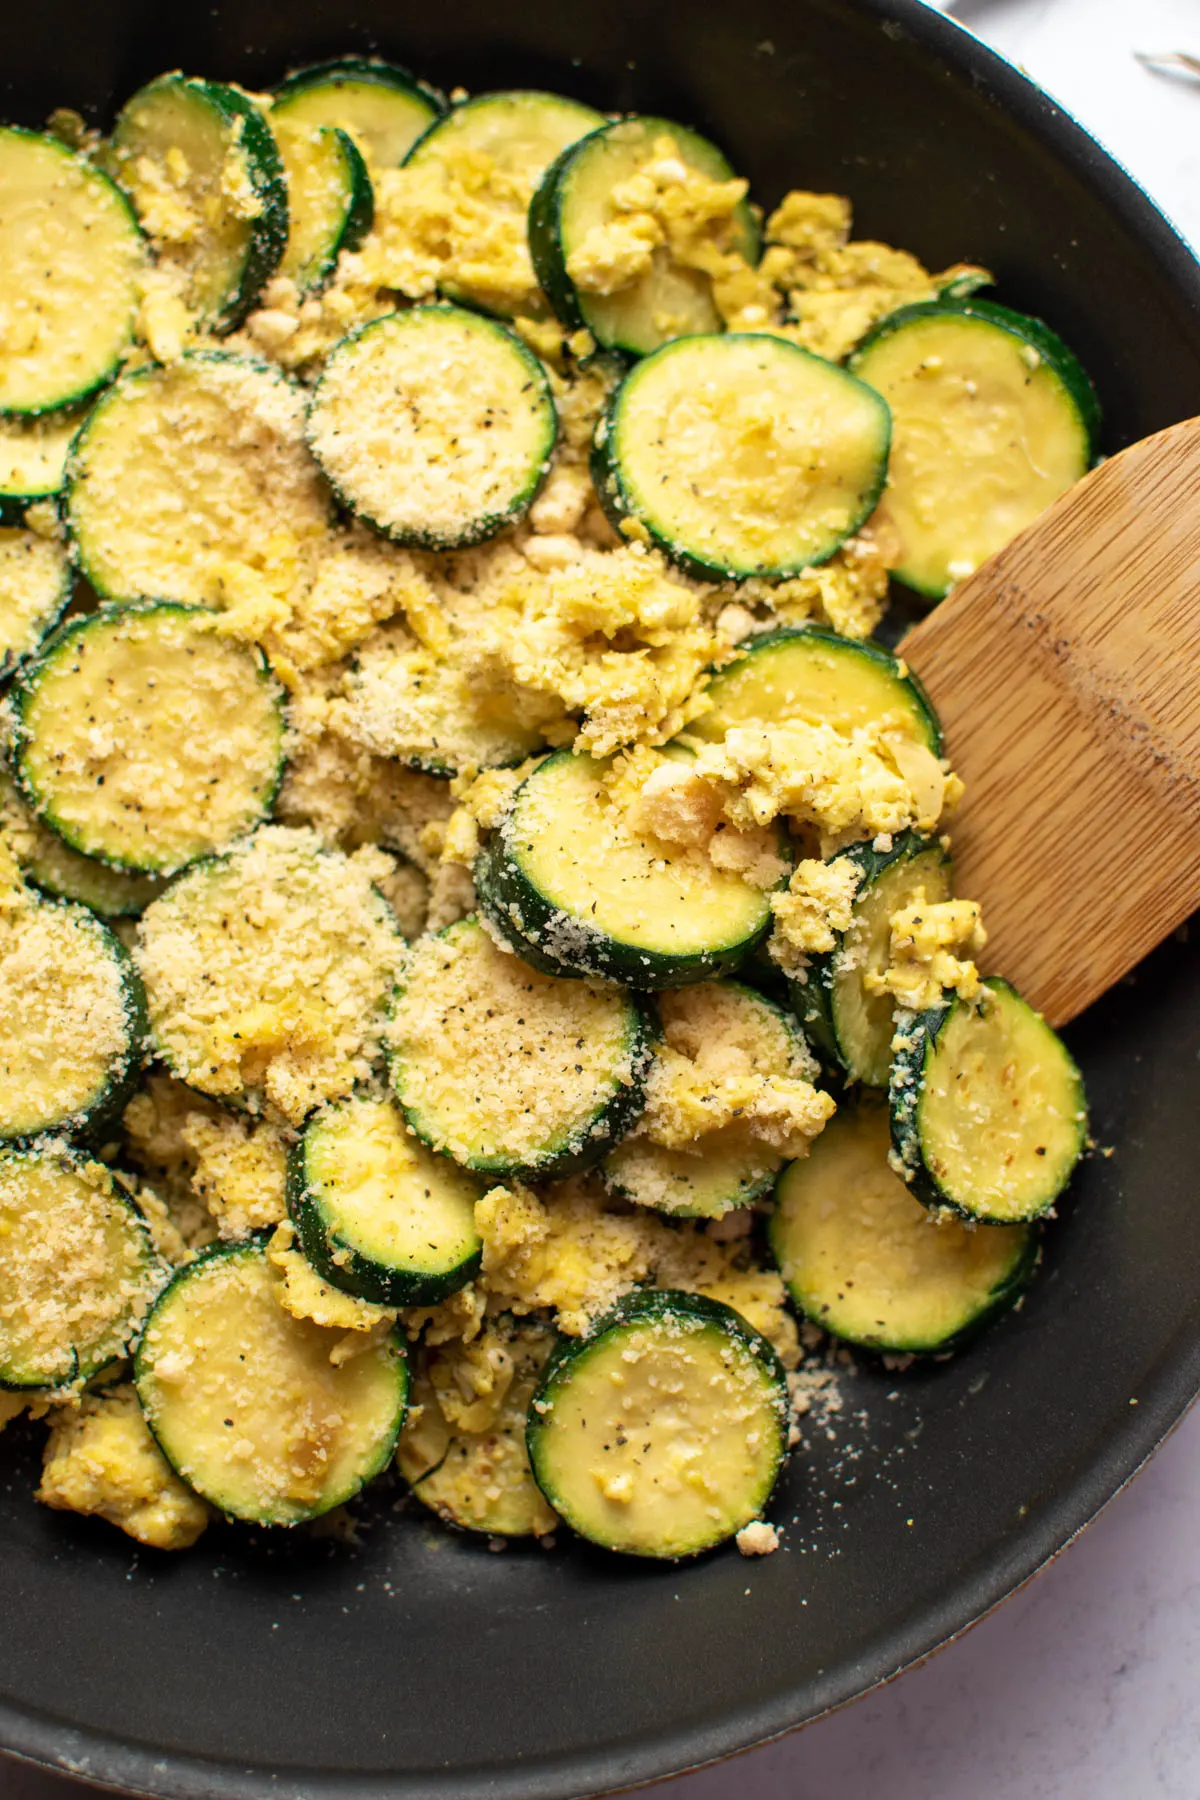 Wood spoon rests in black frying pan with zucchini scrambled eggs and parmesan cheese.